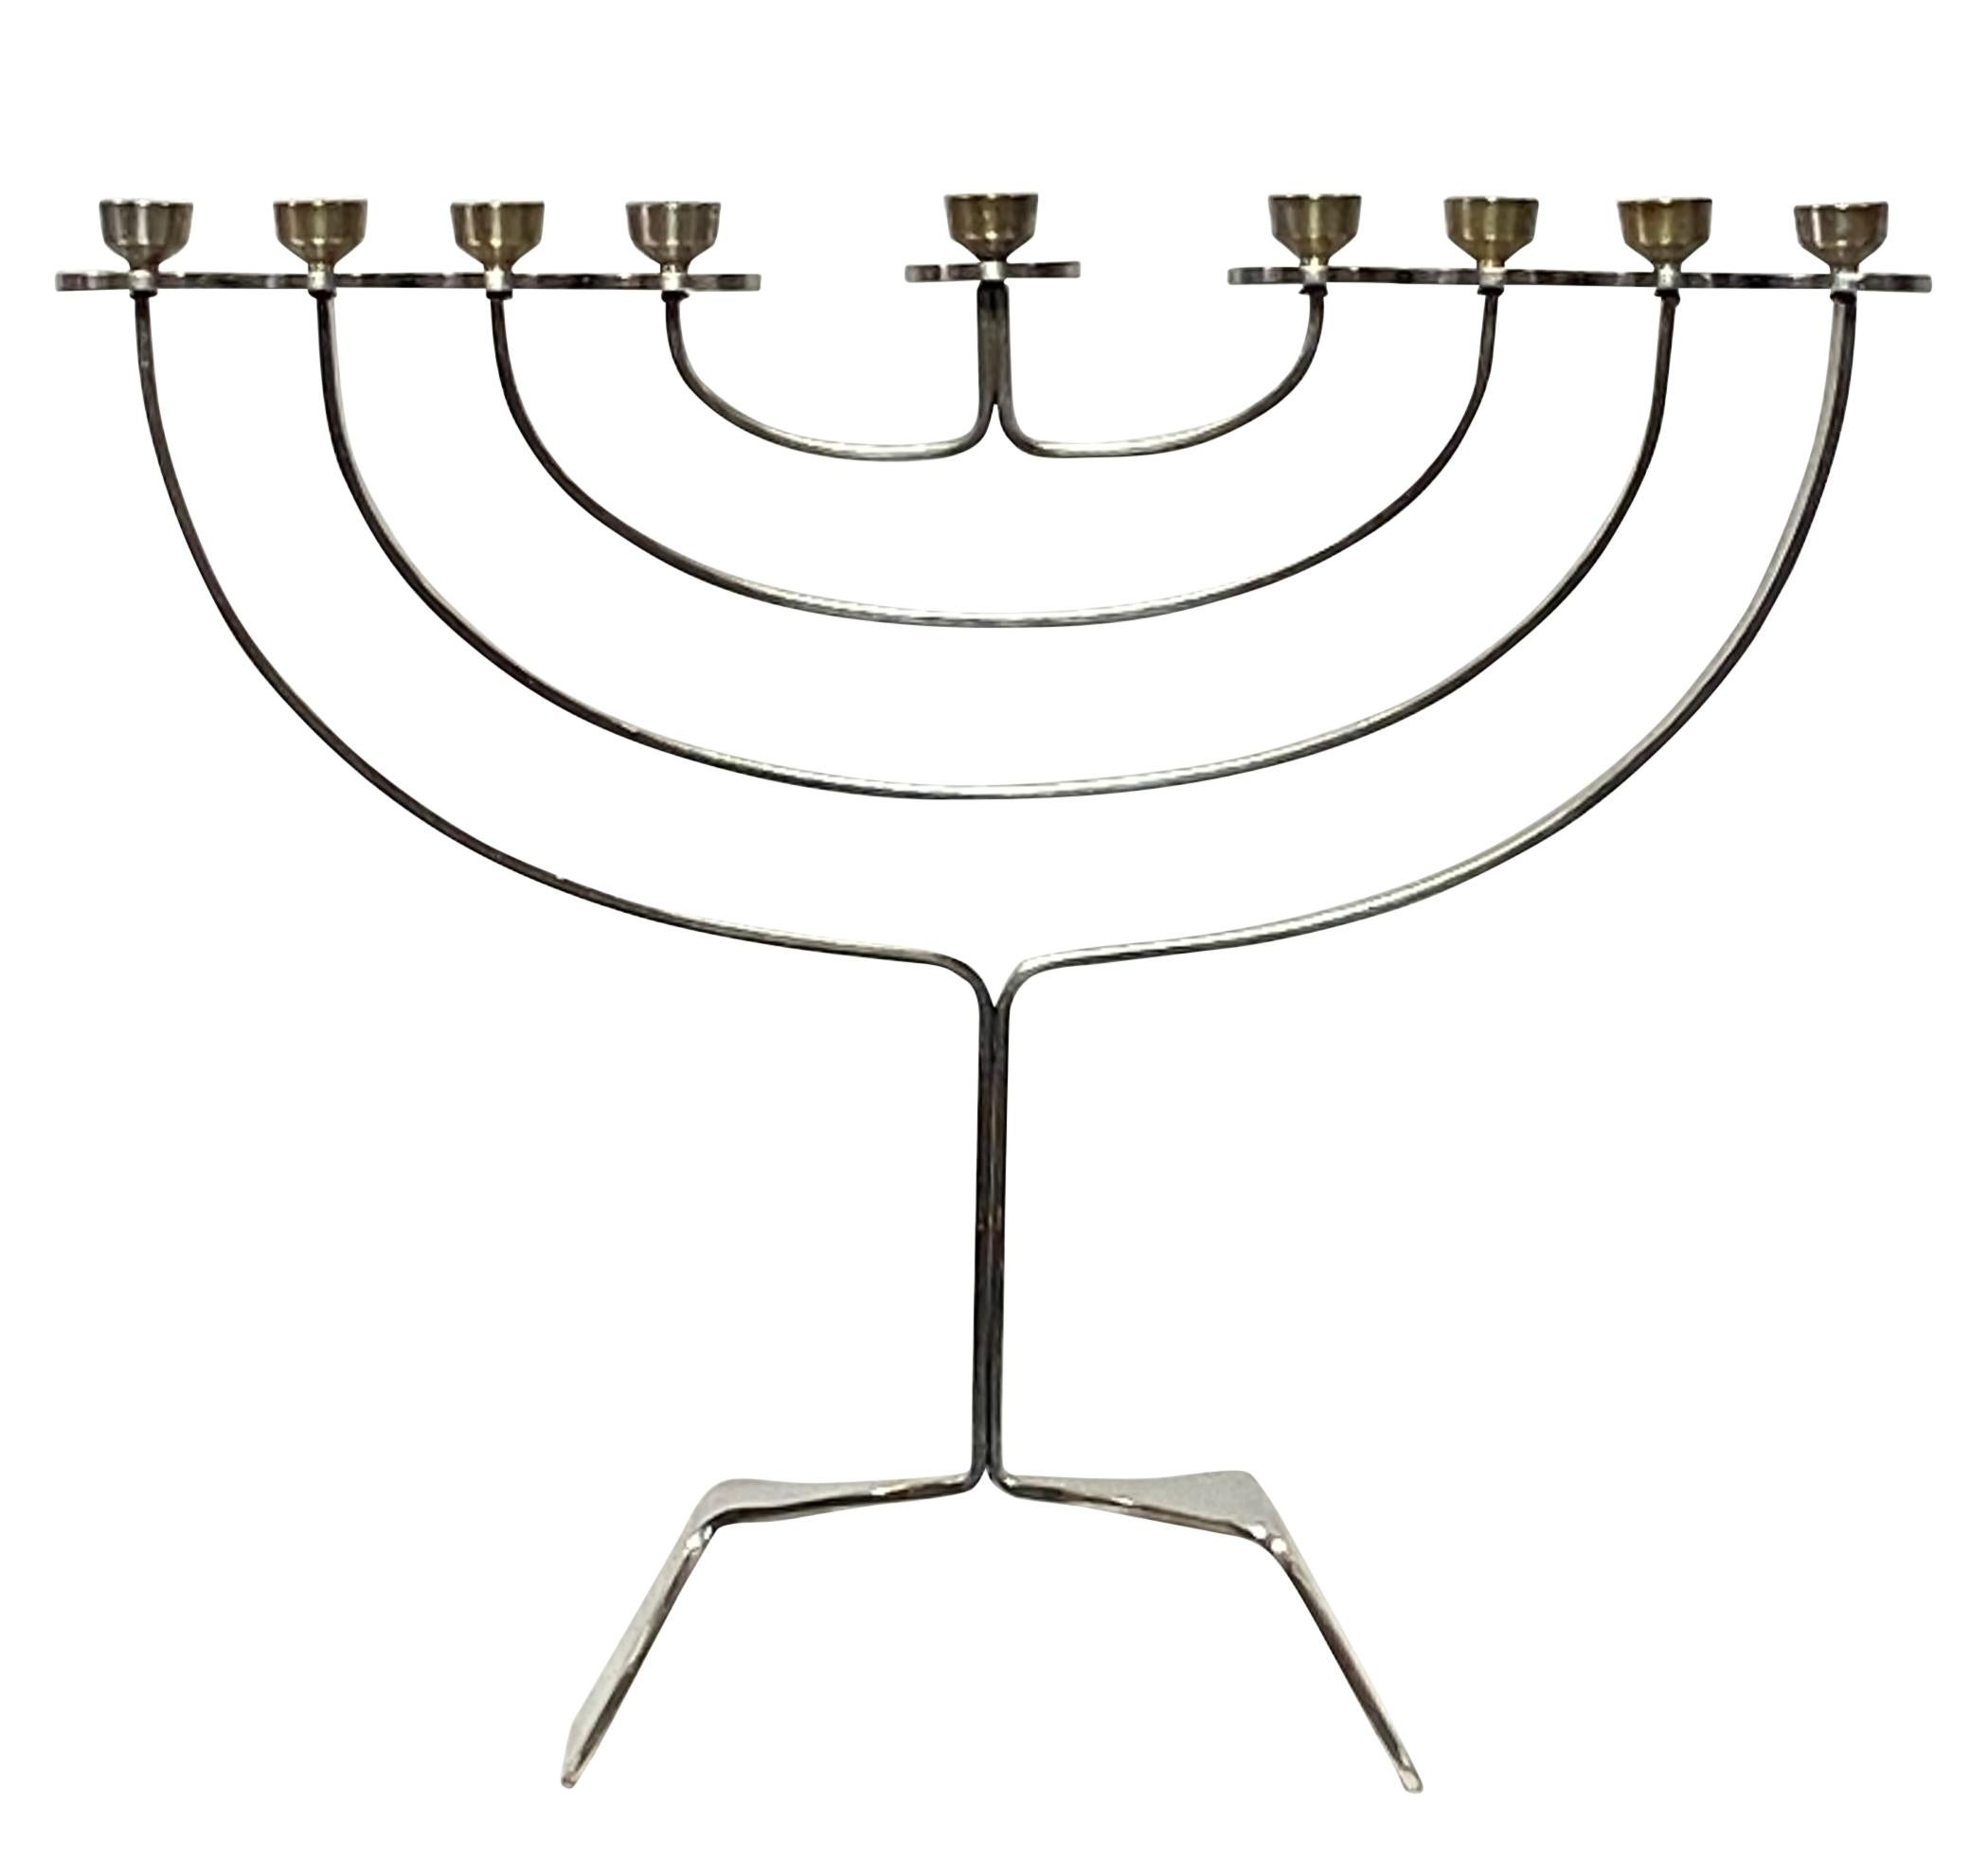 20th Century Mid Century Modern Silver Plate and Brass Menorah Candle Holder For Sale